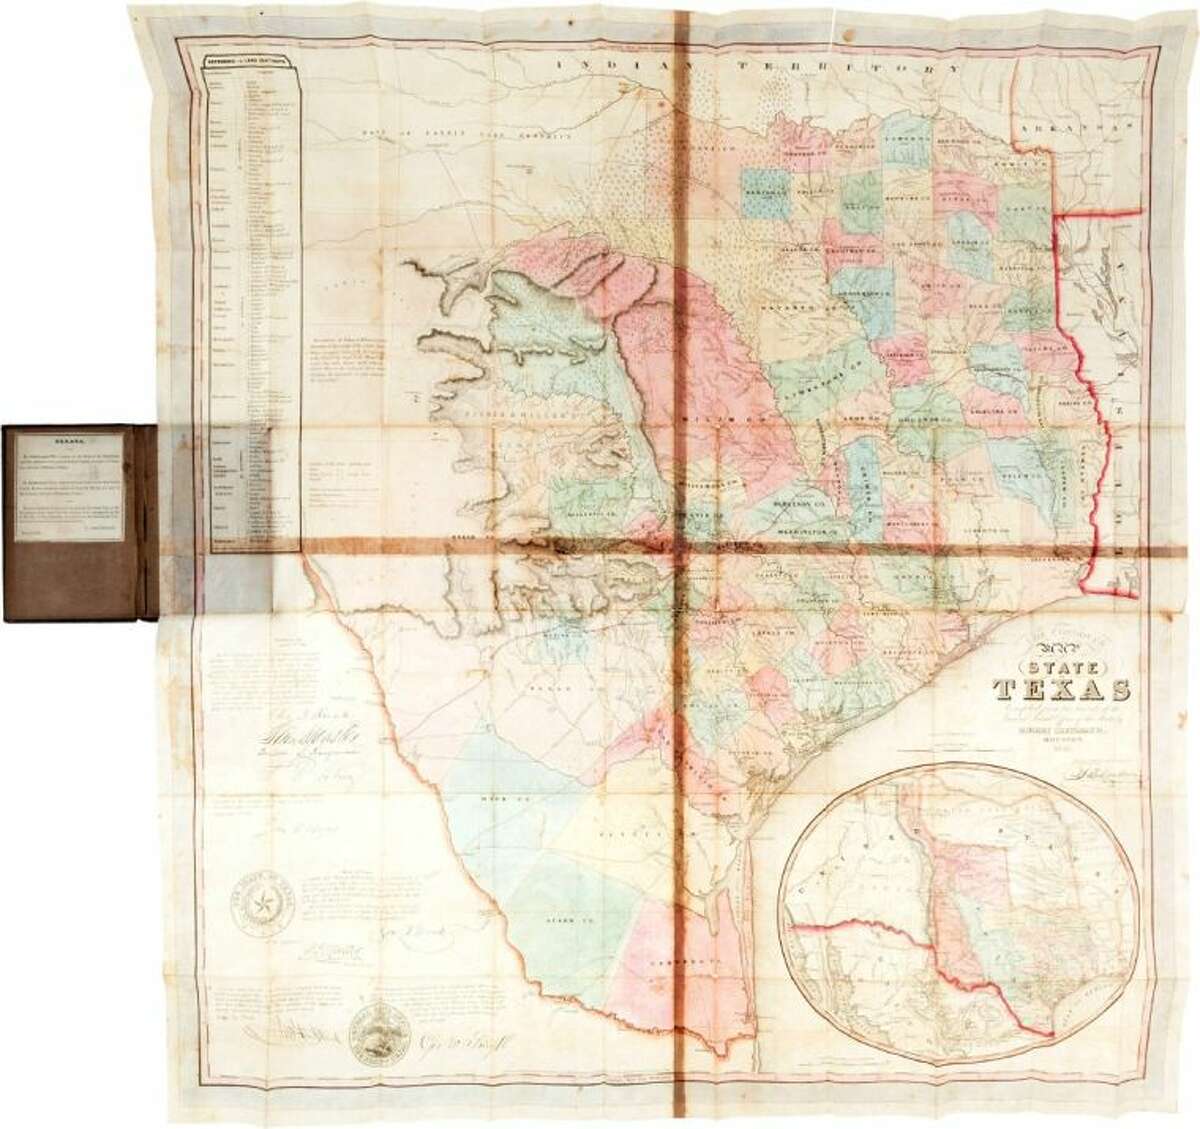 In this undated photo provided by Heritage Auctions is a 1849 first edition map of Texas, considered the first official map after Texas became a state in 1845. It is expected to sell for more than 150,000 when it goes up for auction Saturday in Dallas by Heritage Auctions.